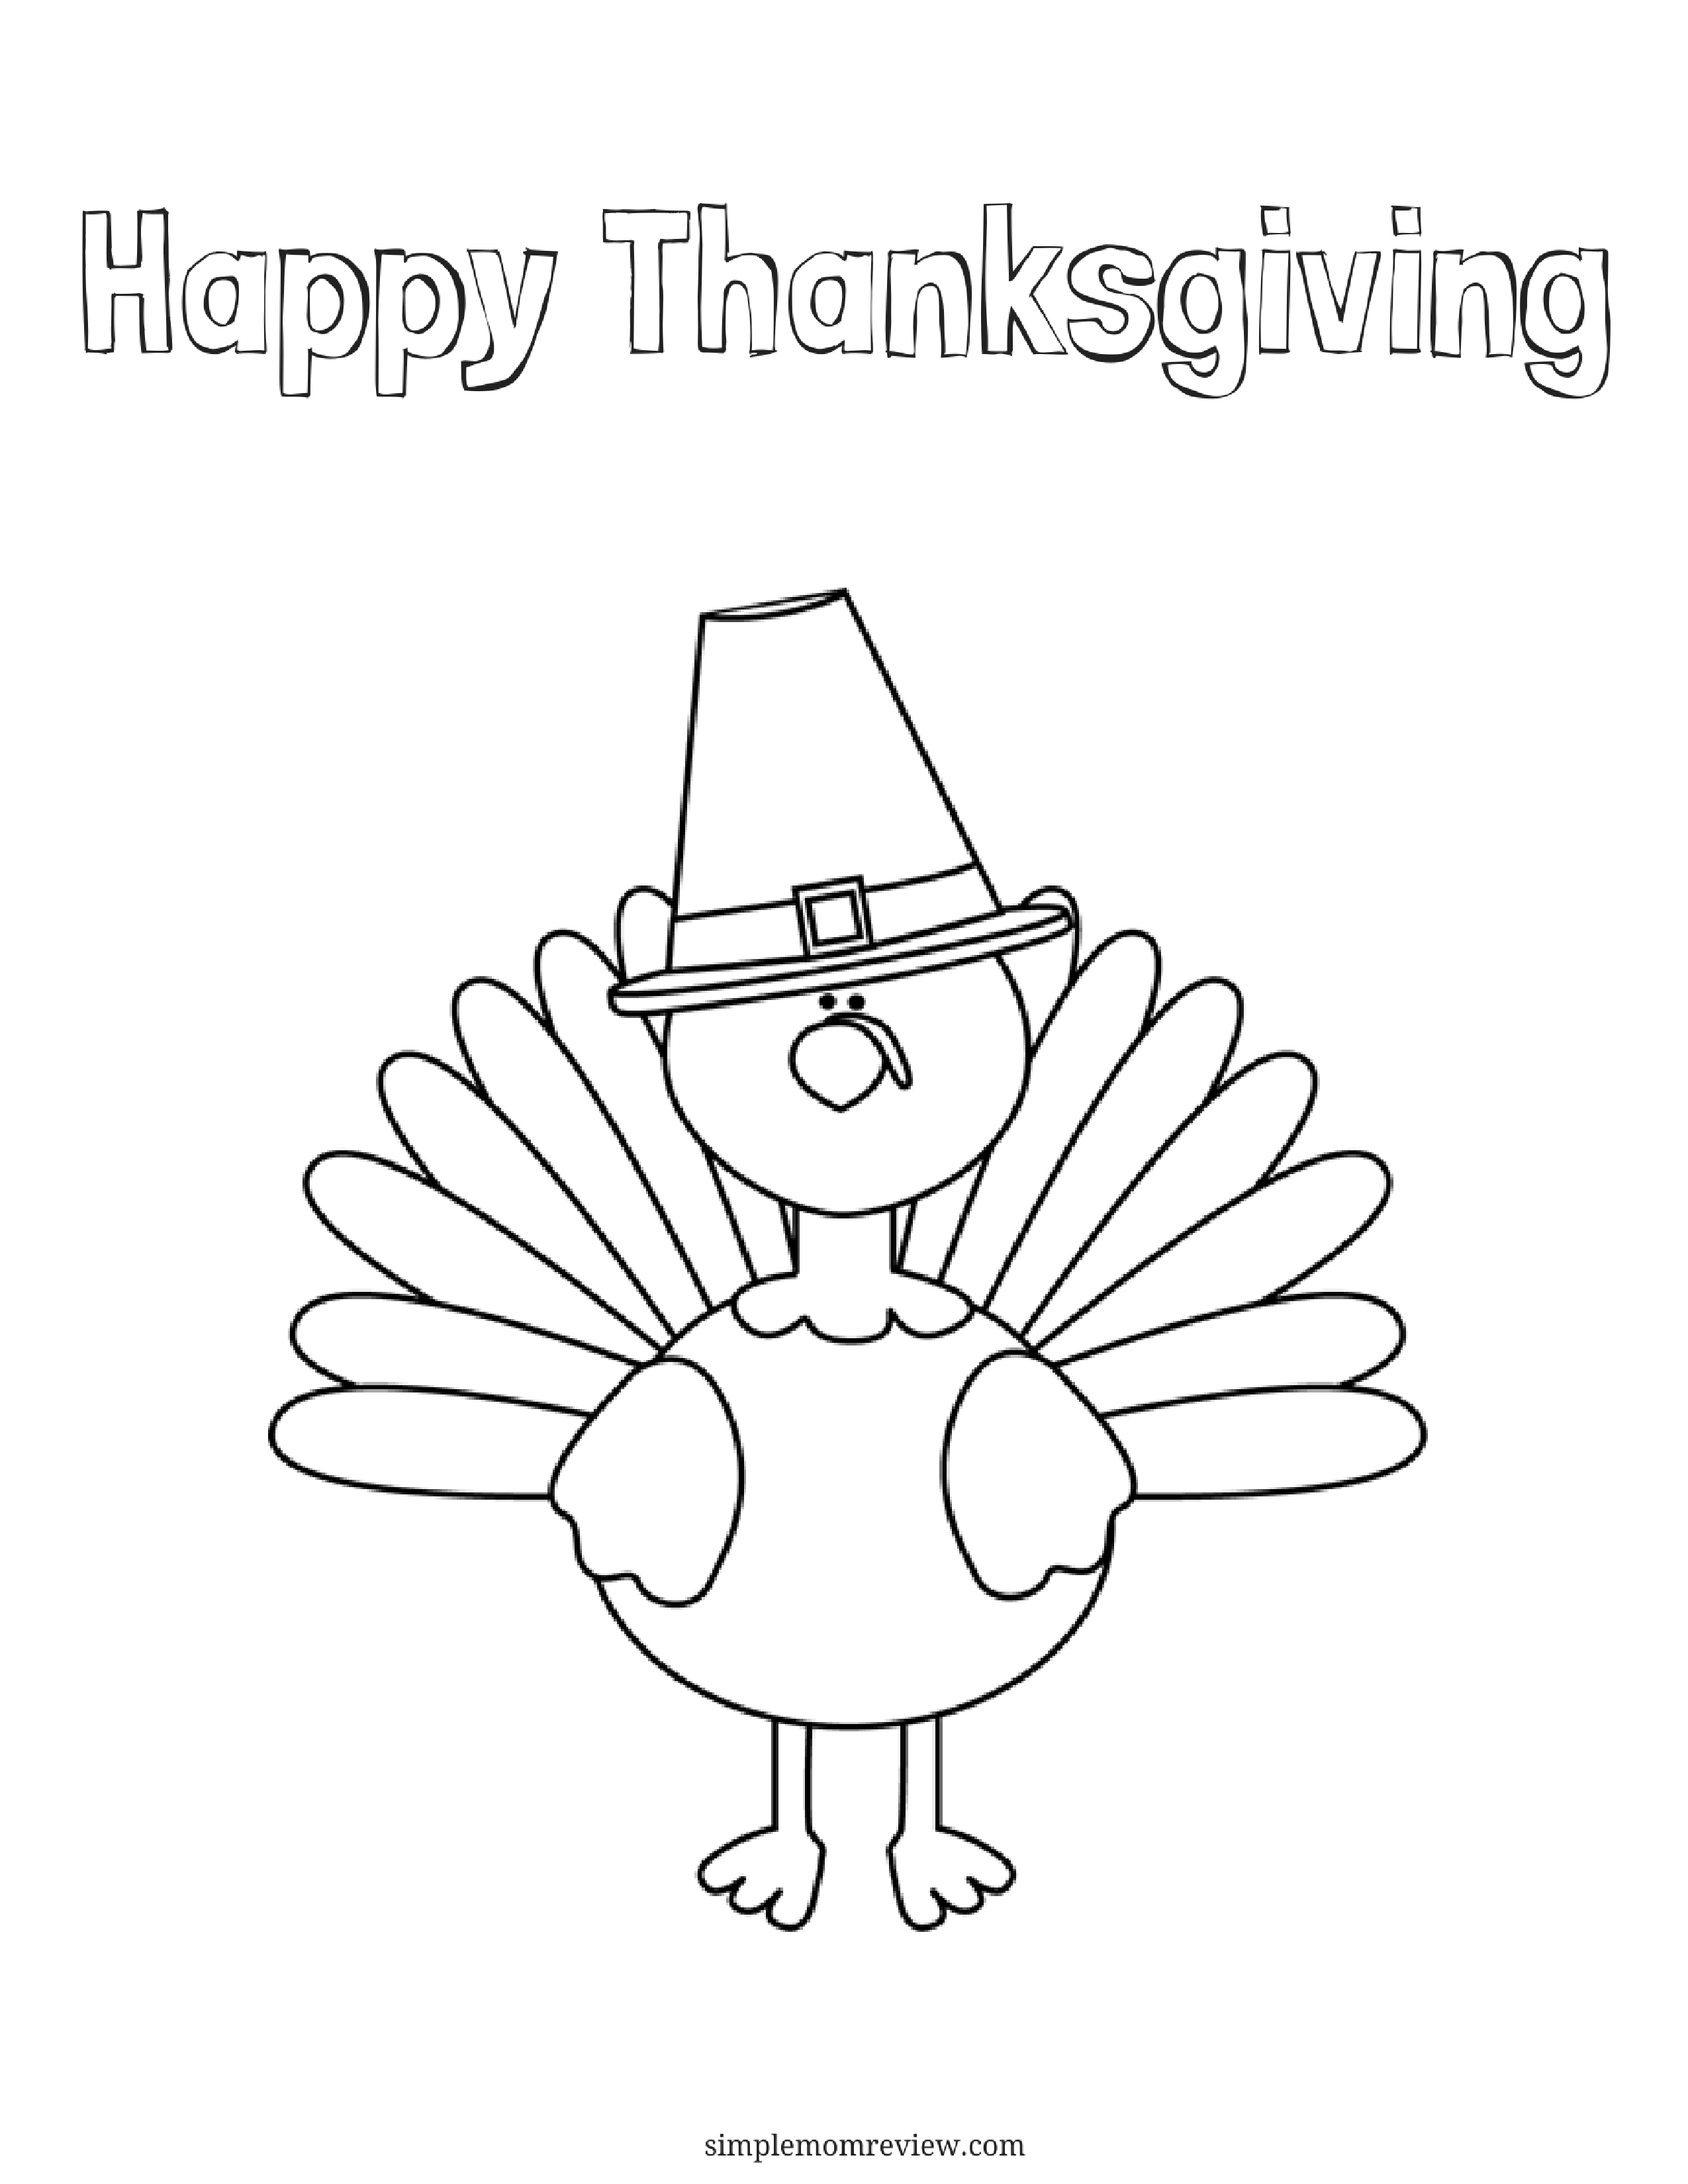 turkey-coloring-page-free-printable-simple-mom-review